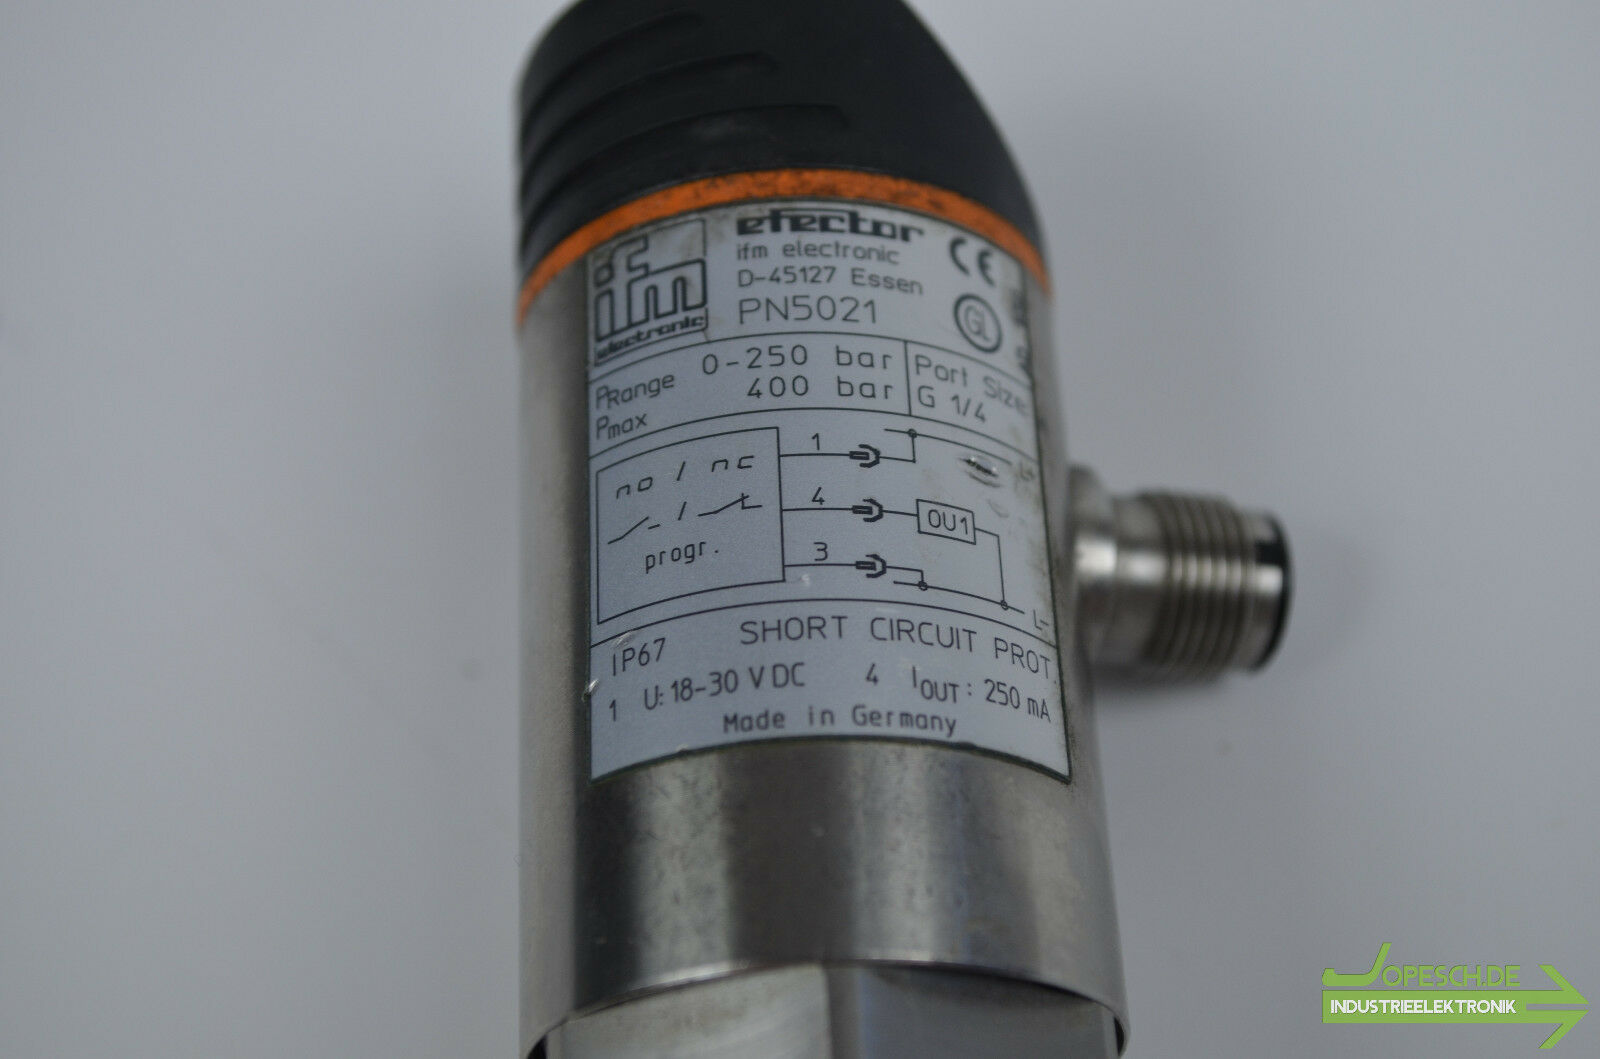 ifm electronic efector PN5021